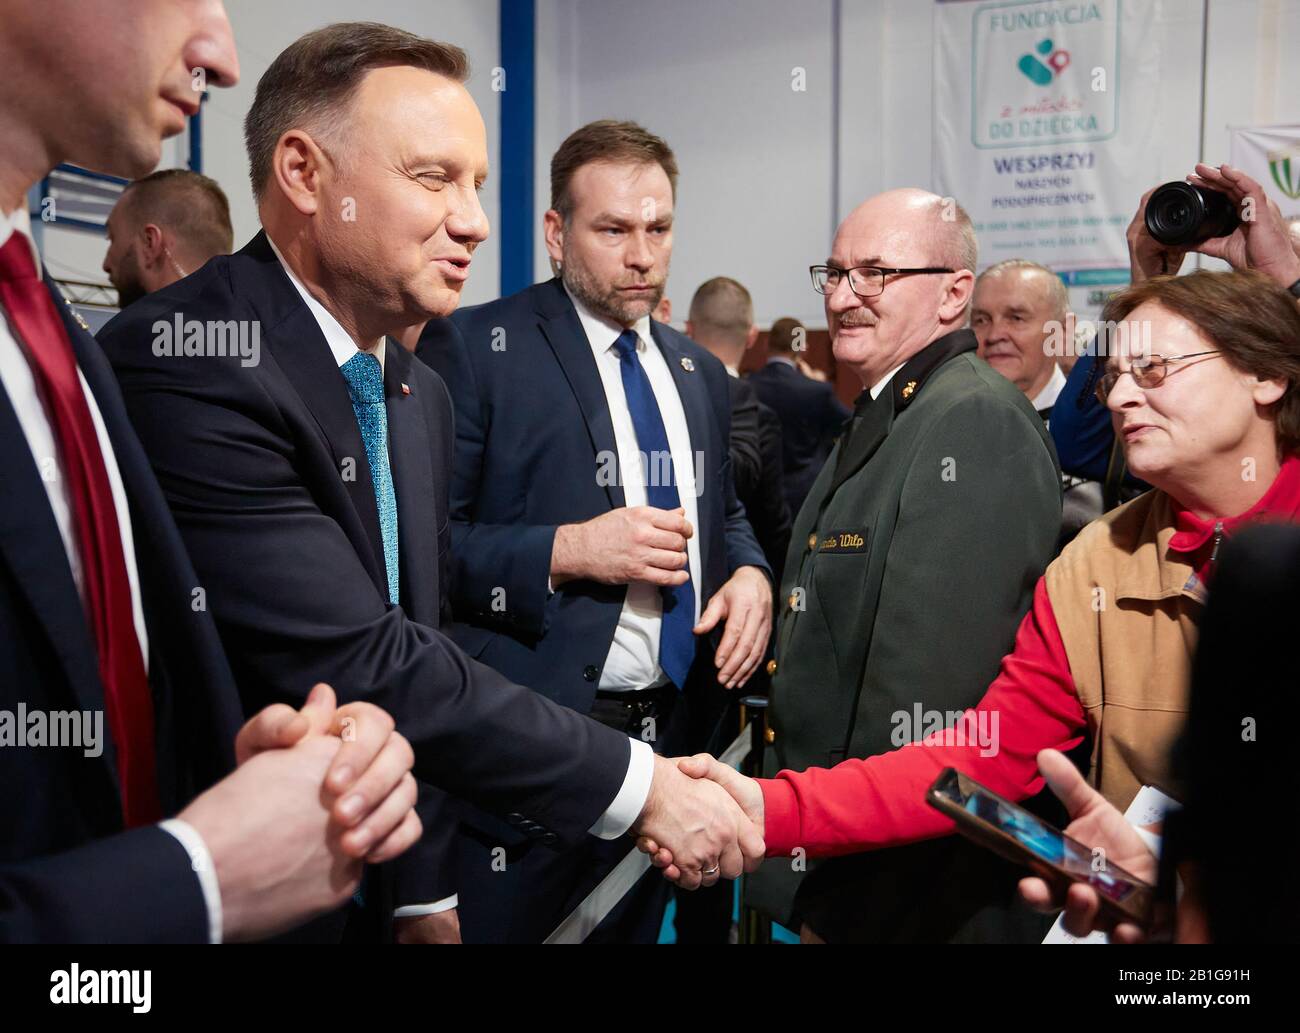 Zyrardow, Mazovian, Poland. 25th Feb, 2020. The Act on Additional Annual Benefit for Retirees and Pensioners Was Solemnly Signed by President Andrzej Duda During a Visit to Zyrardow. Most Seniors Will Already Receive an Additional Benefit in April. Pension Plus Will Support Home Budgets of Around 9.8 Million People.in the picture: ANDRZEJ DUDA Credit: Hubert Mathis/ZUMA Wire/Alamy Live News Stock Photo